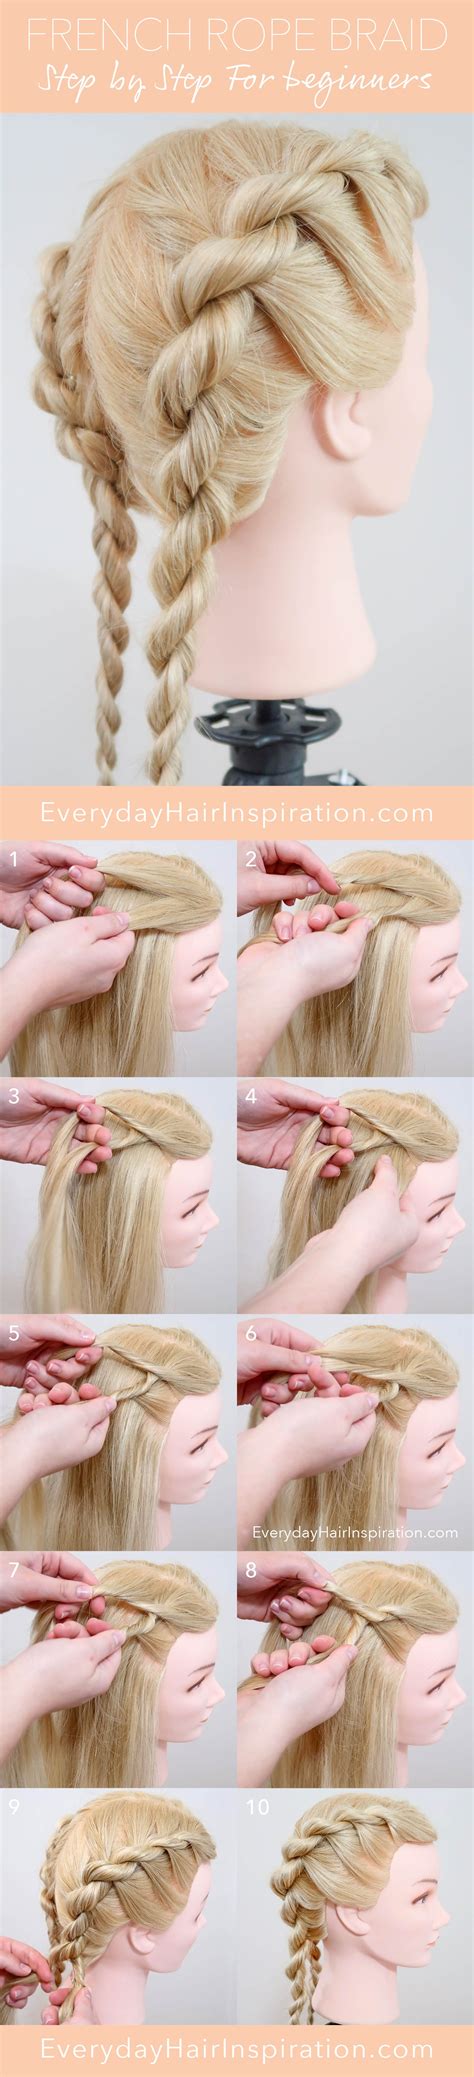 French Rope Braid Step By Step Everyday Hair Inspiration